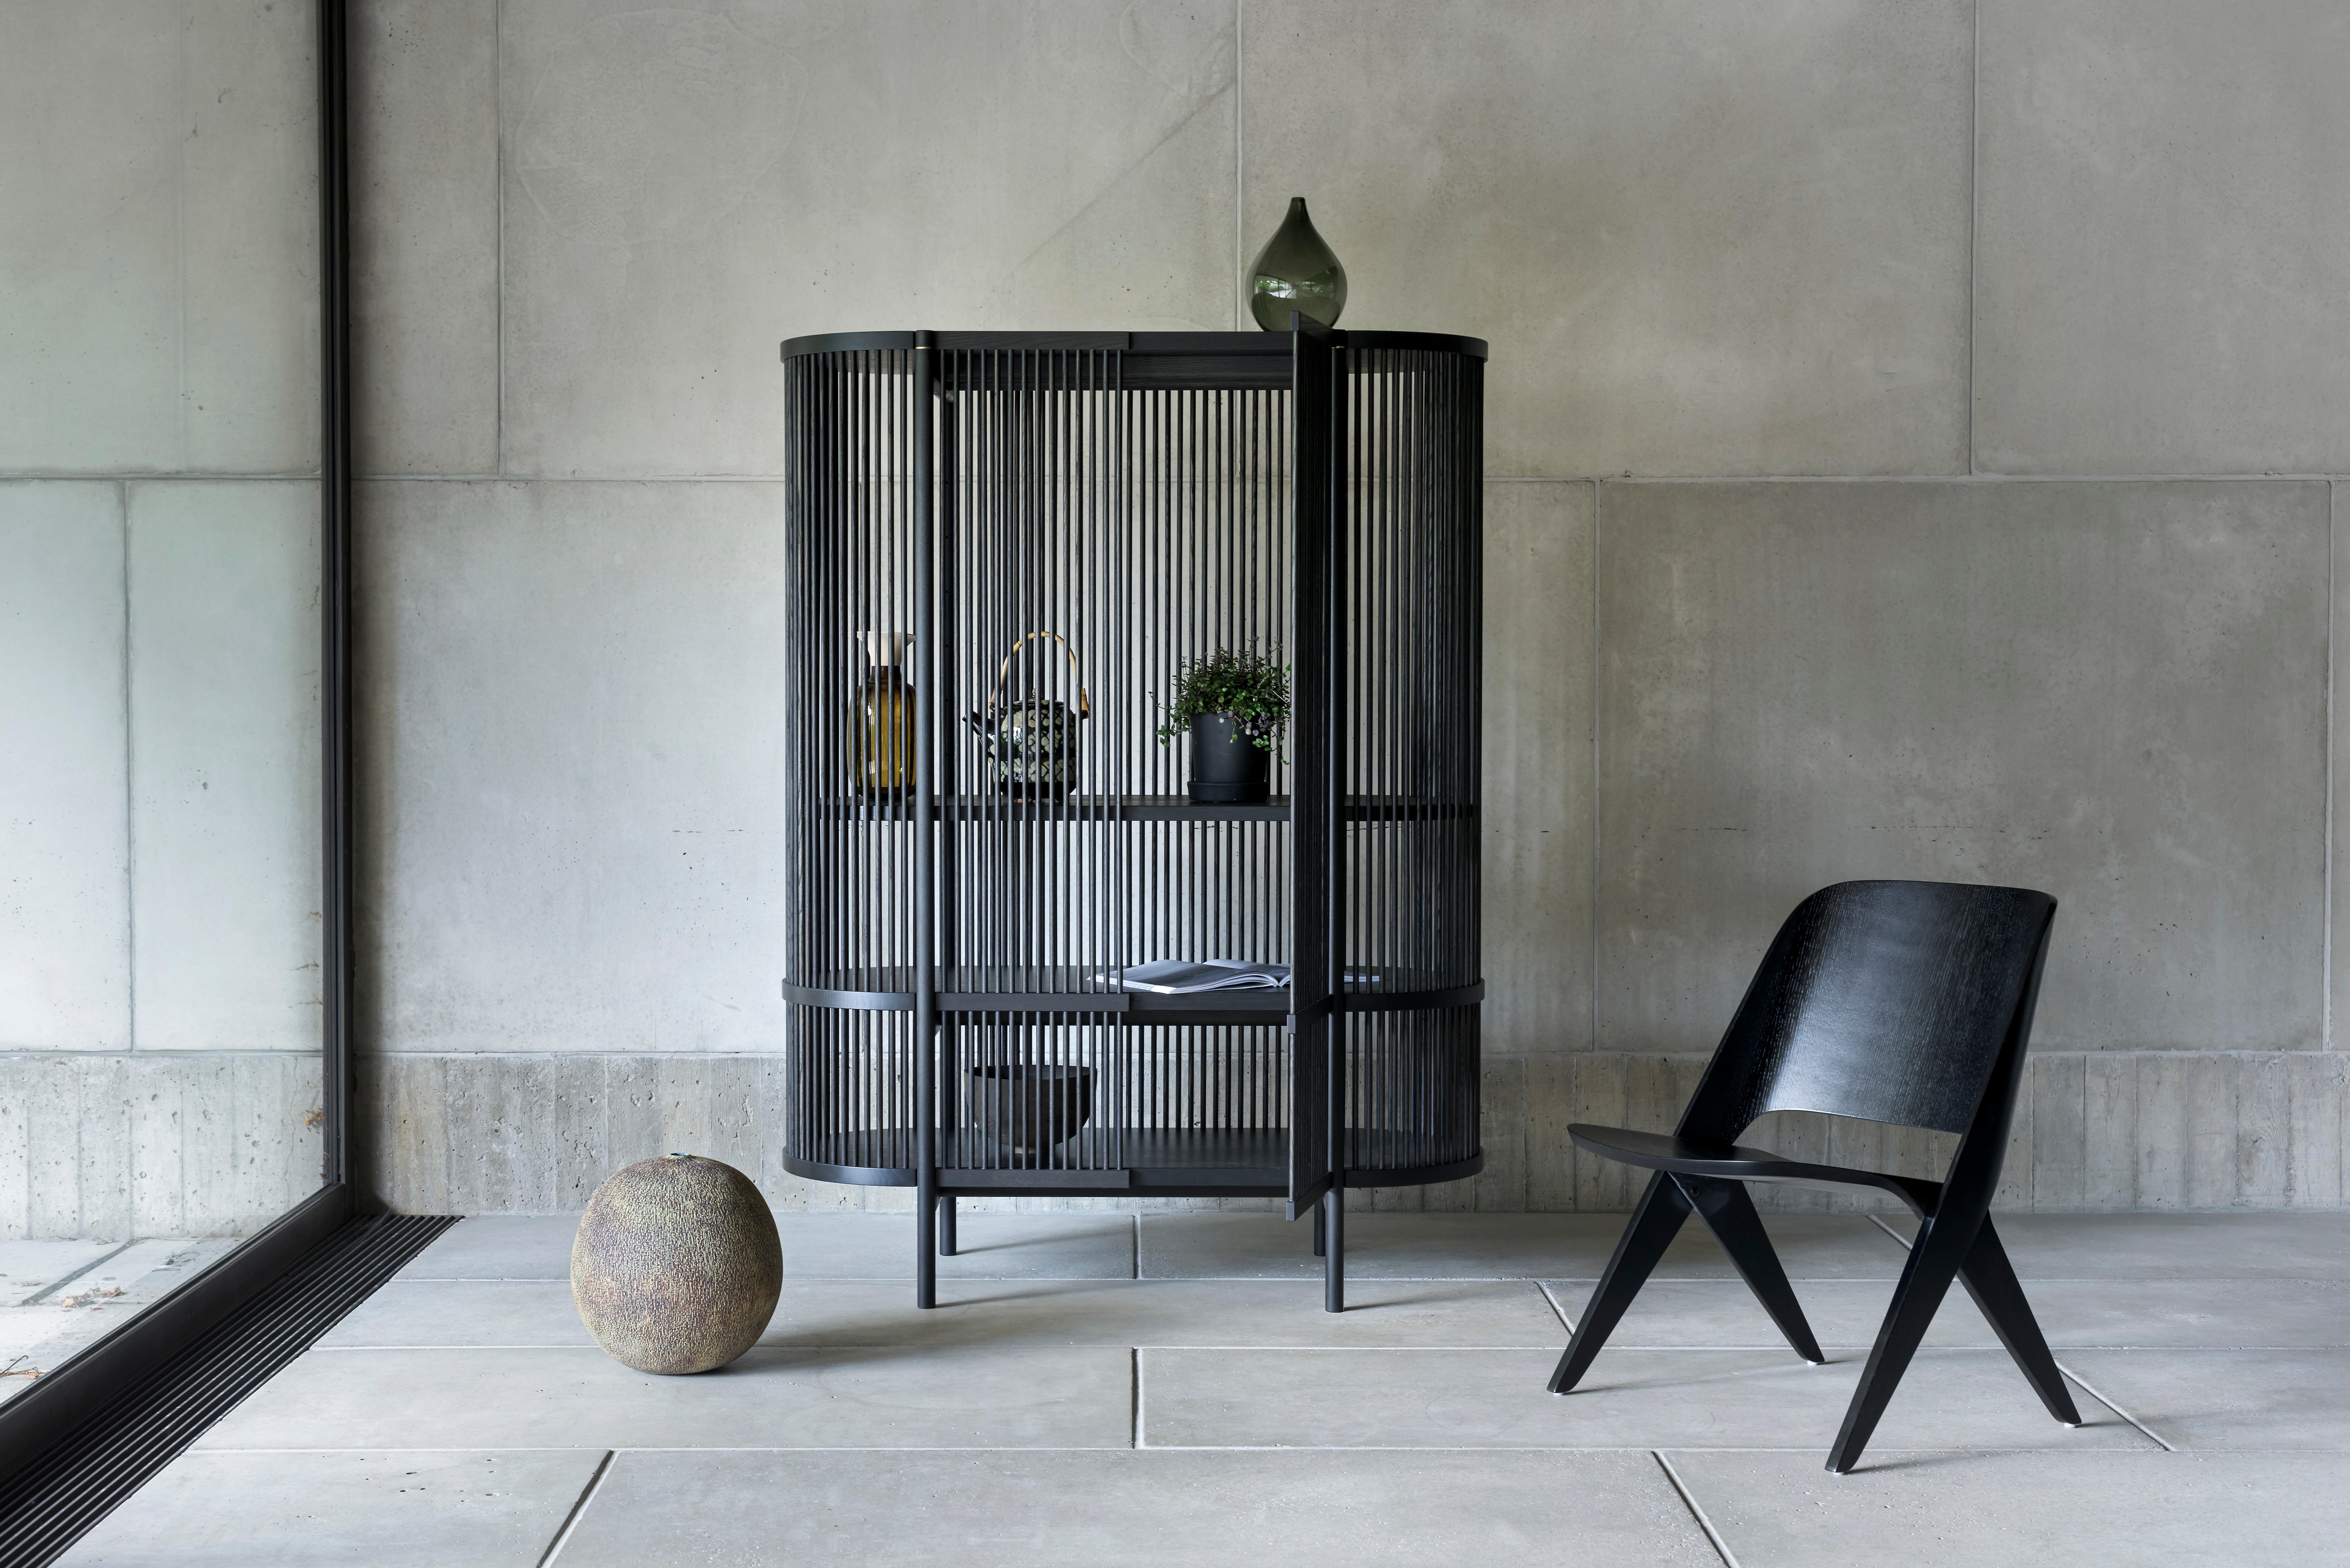 The Bastone case piece collection, which consists of a cabinet and a sideboard, is designed by the master cabinet maker and designer Antrei Hartikainen for Poiat studio. Somewhere on the boundary of art and design, the collection showcases the